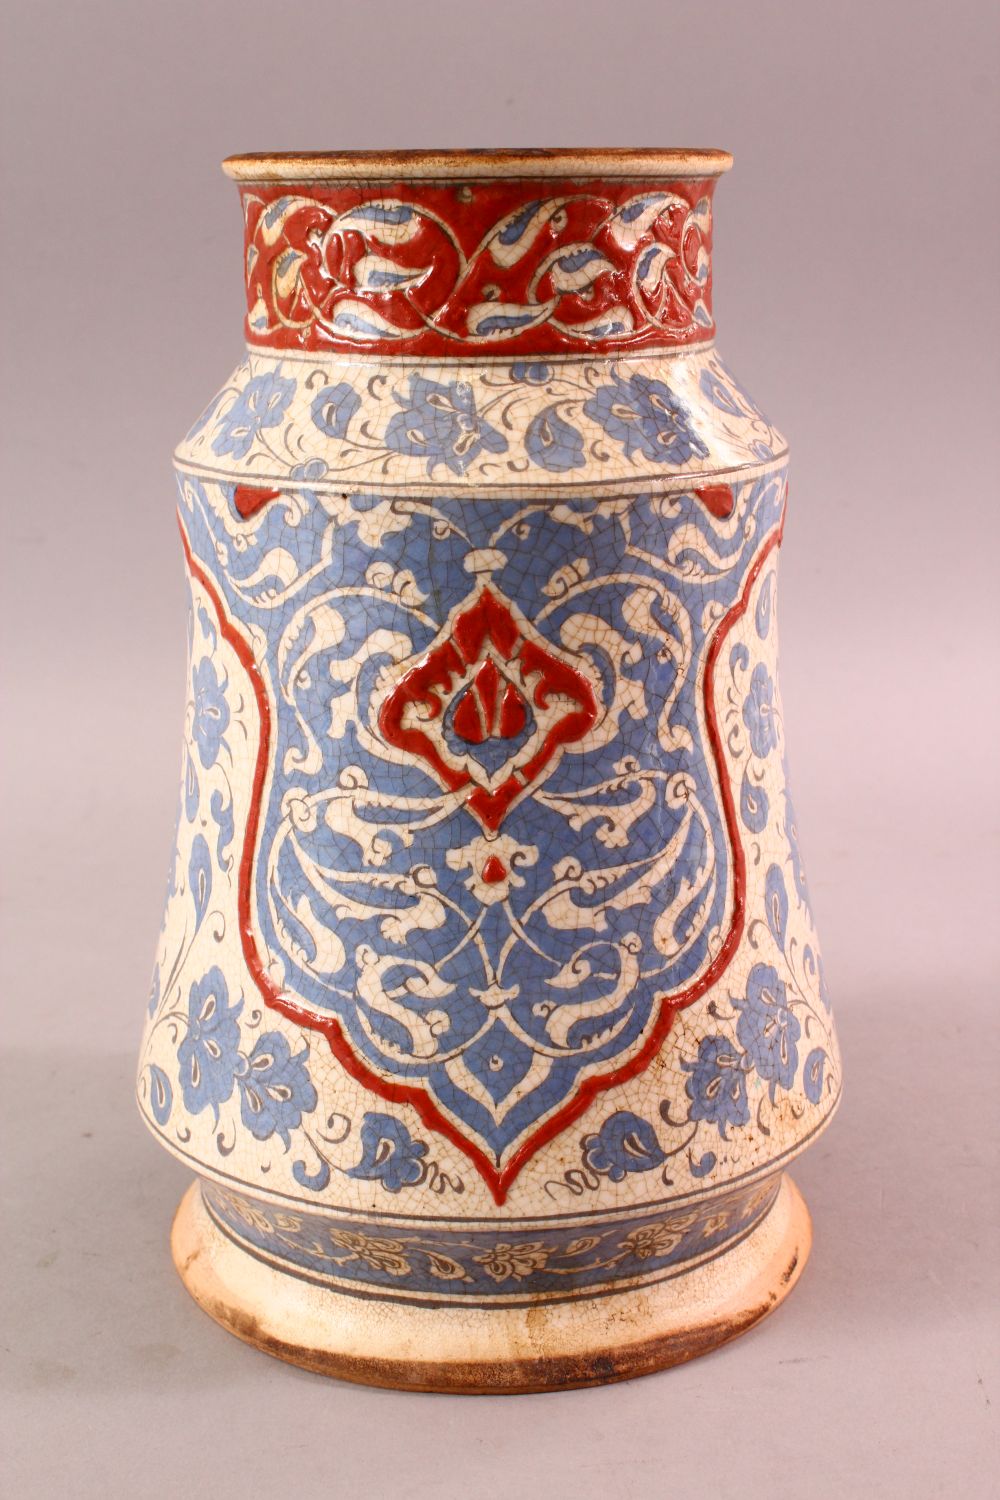 A FRENCH POTTERY IZNIK STYLE POTTERY VASE, with a hite ground and sy blue decoration with floral - Image 2 of 6